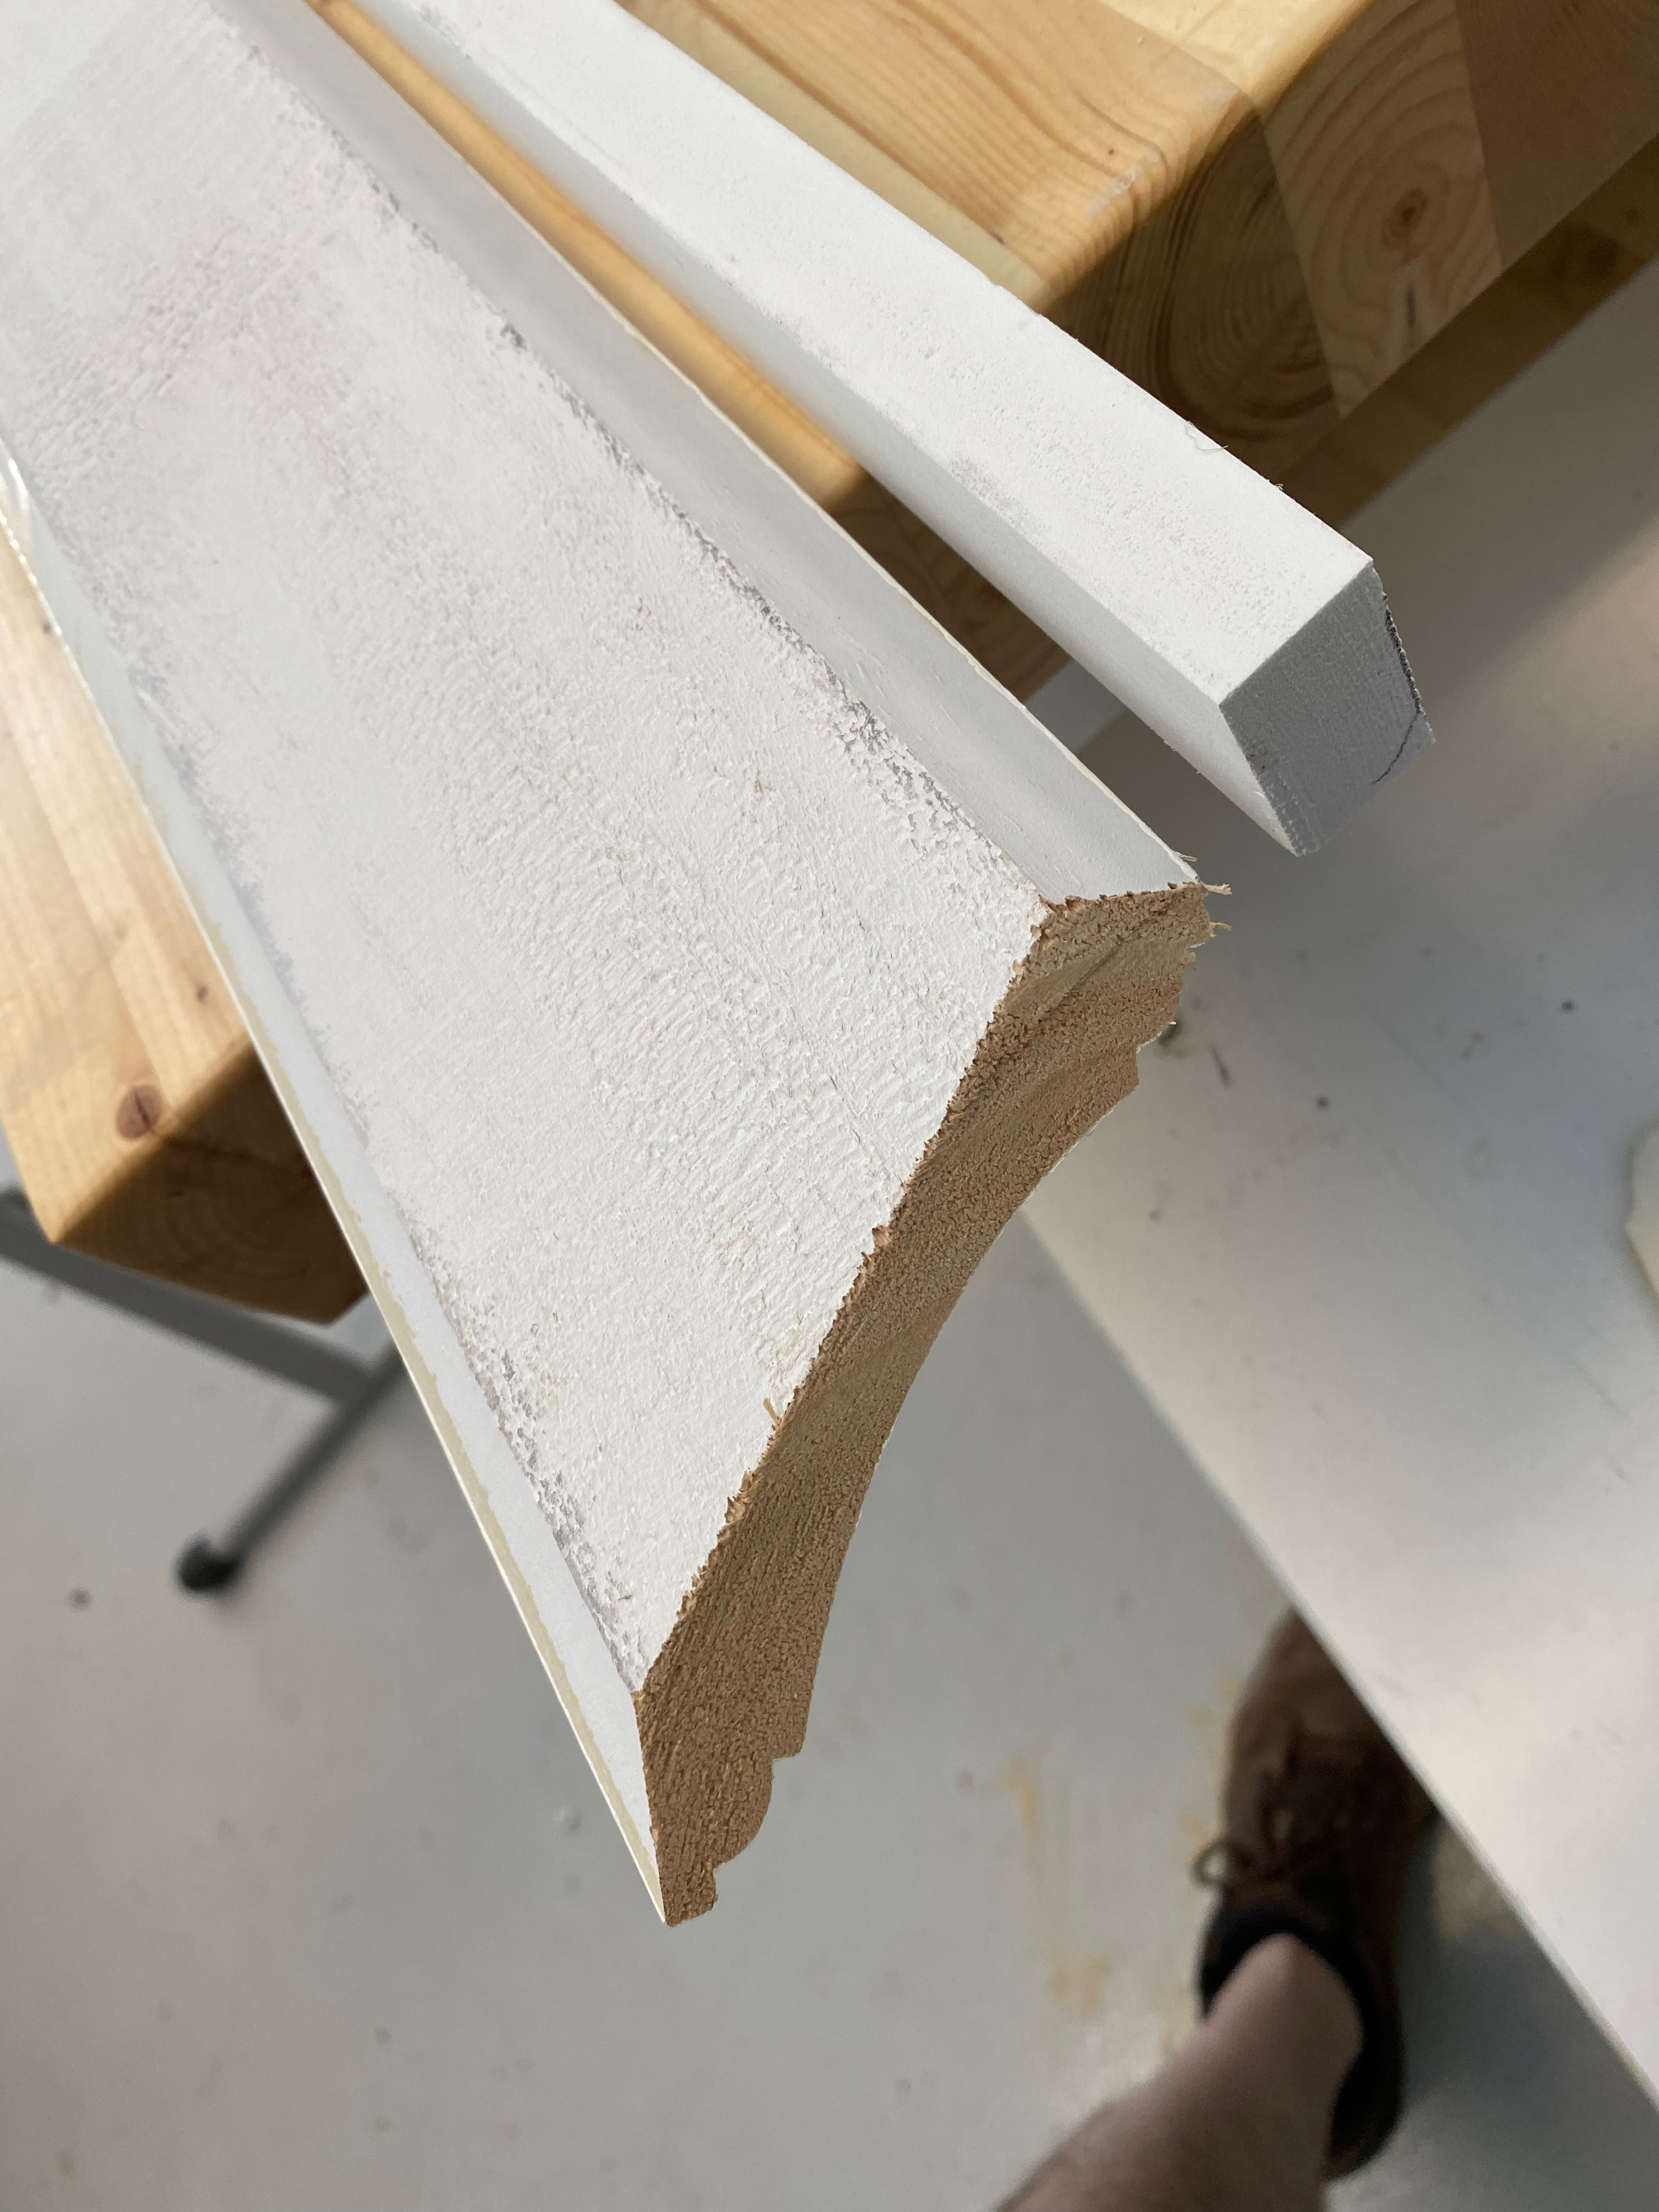 Adding backing to the molding